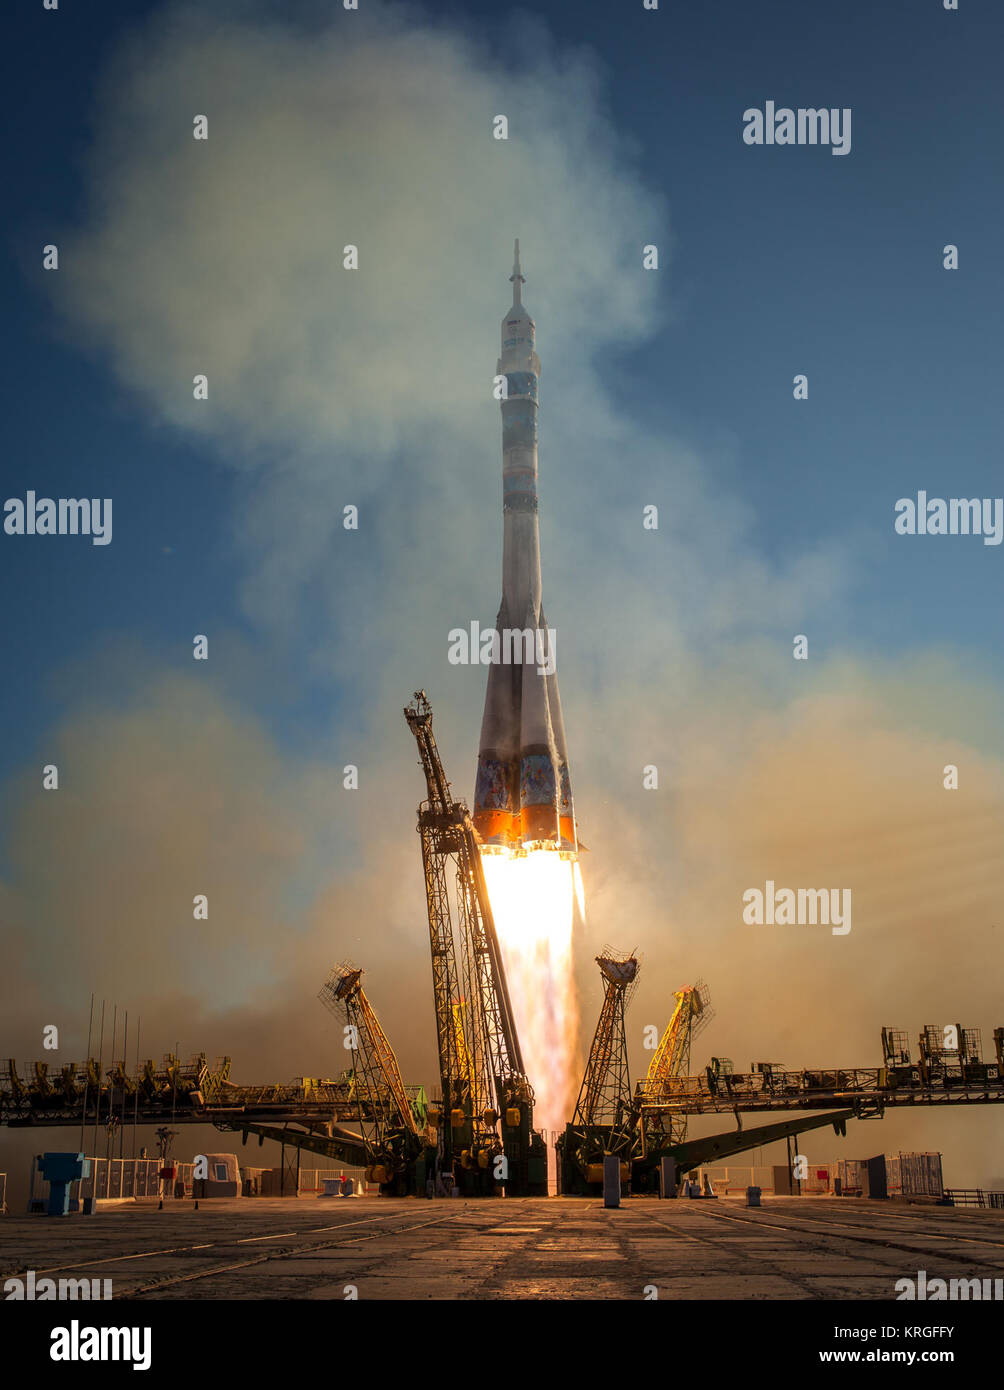 The Soyuz TMA-11M rocket is launched with Expedition 38 Soyuz Commander Mikhail Tyurin of Roscosmos, Flight Engineer Rick Mastracchio of NASA and Flight Engineer Koichi Wakata of the Japan Aerospace Exploration Agency onboard, Thursday, Nov. 7, 2013, at the Baikonur Cosmodrome in Kazakhstan. Tyurin, Mastracchio, and, Wakata will spend the next six months aboard the International Space Station.  Photo Credit: (NASA/Bill Ingalls) Soyuz TMA-11M rocket launches from Baikonur (2) Stock Photo